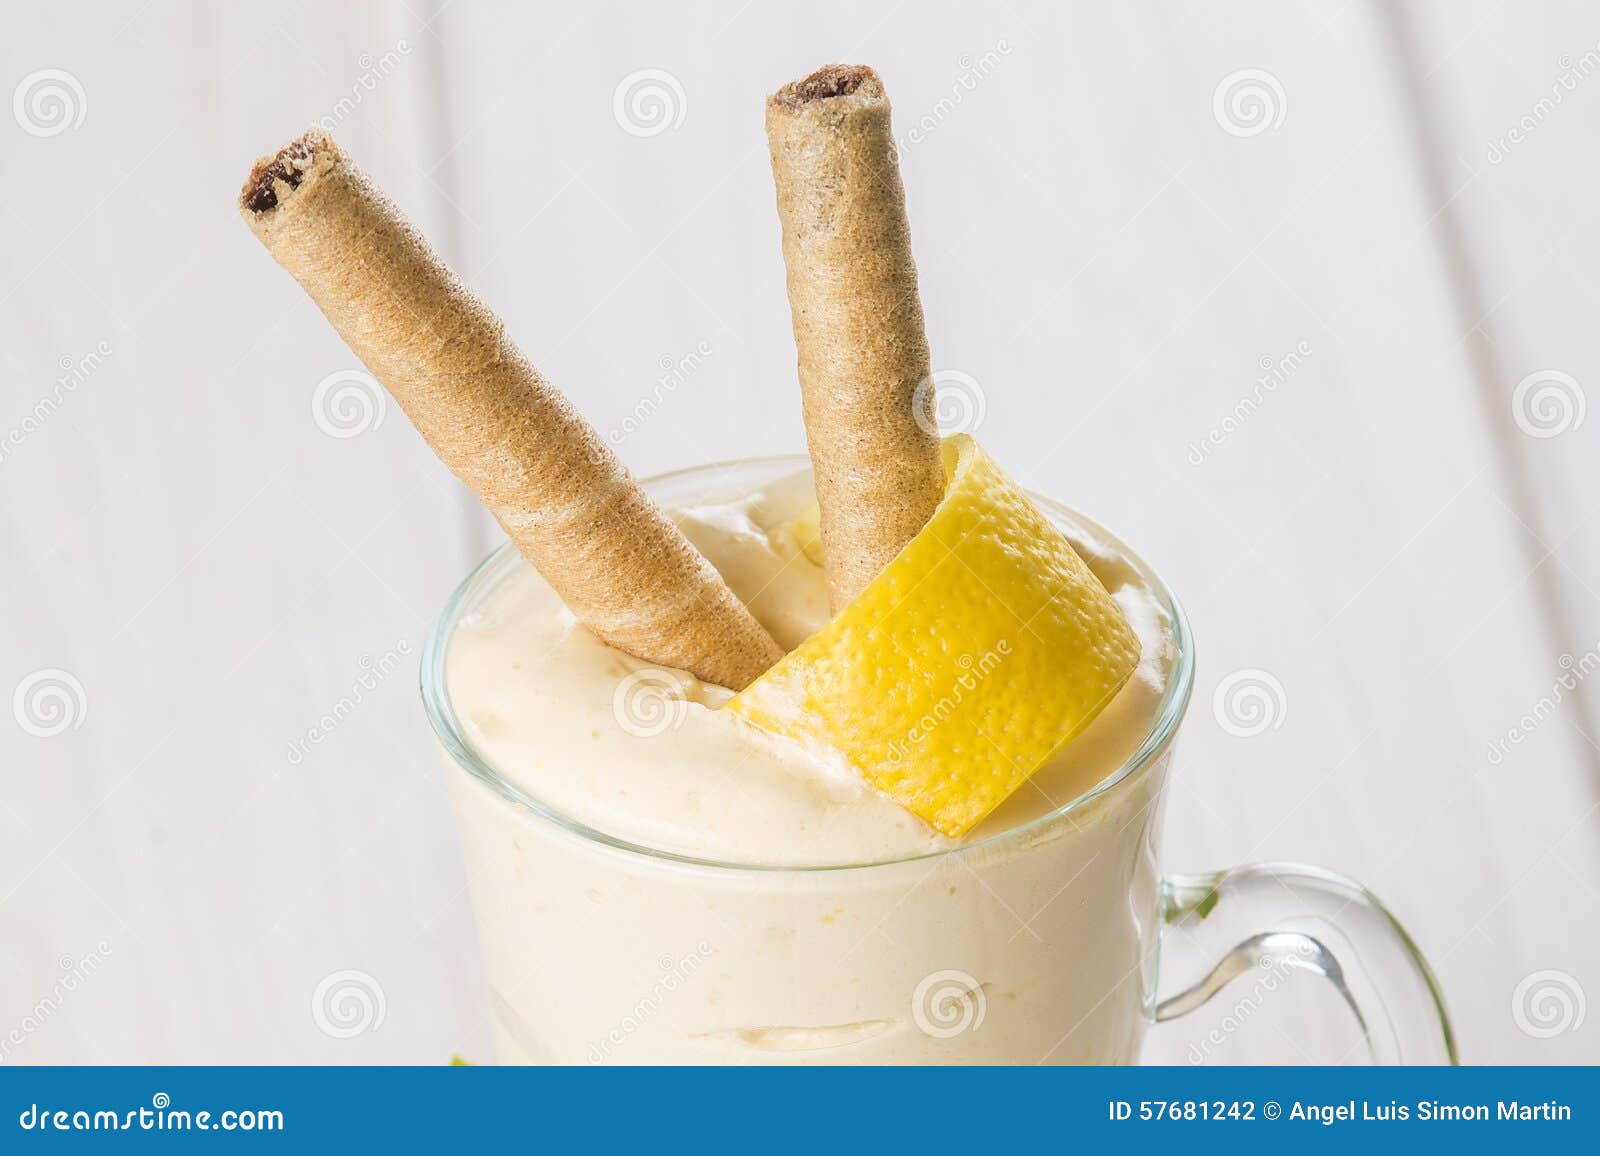 banana smoothie decorated with a lemon zest